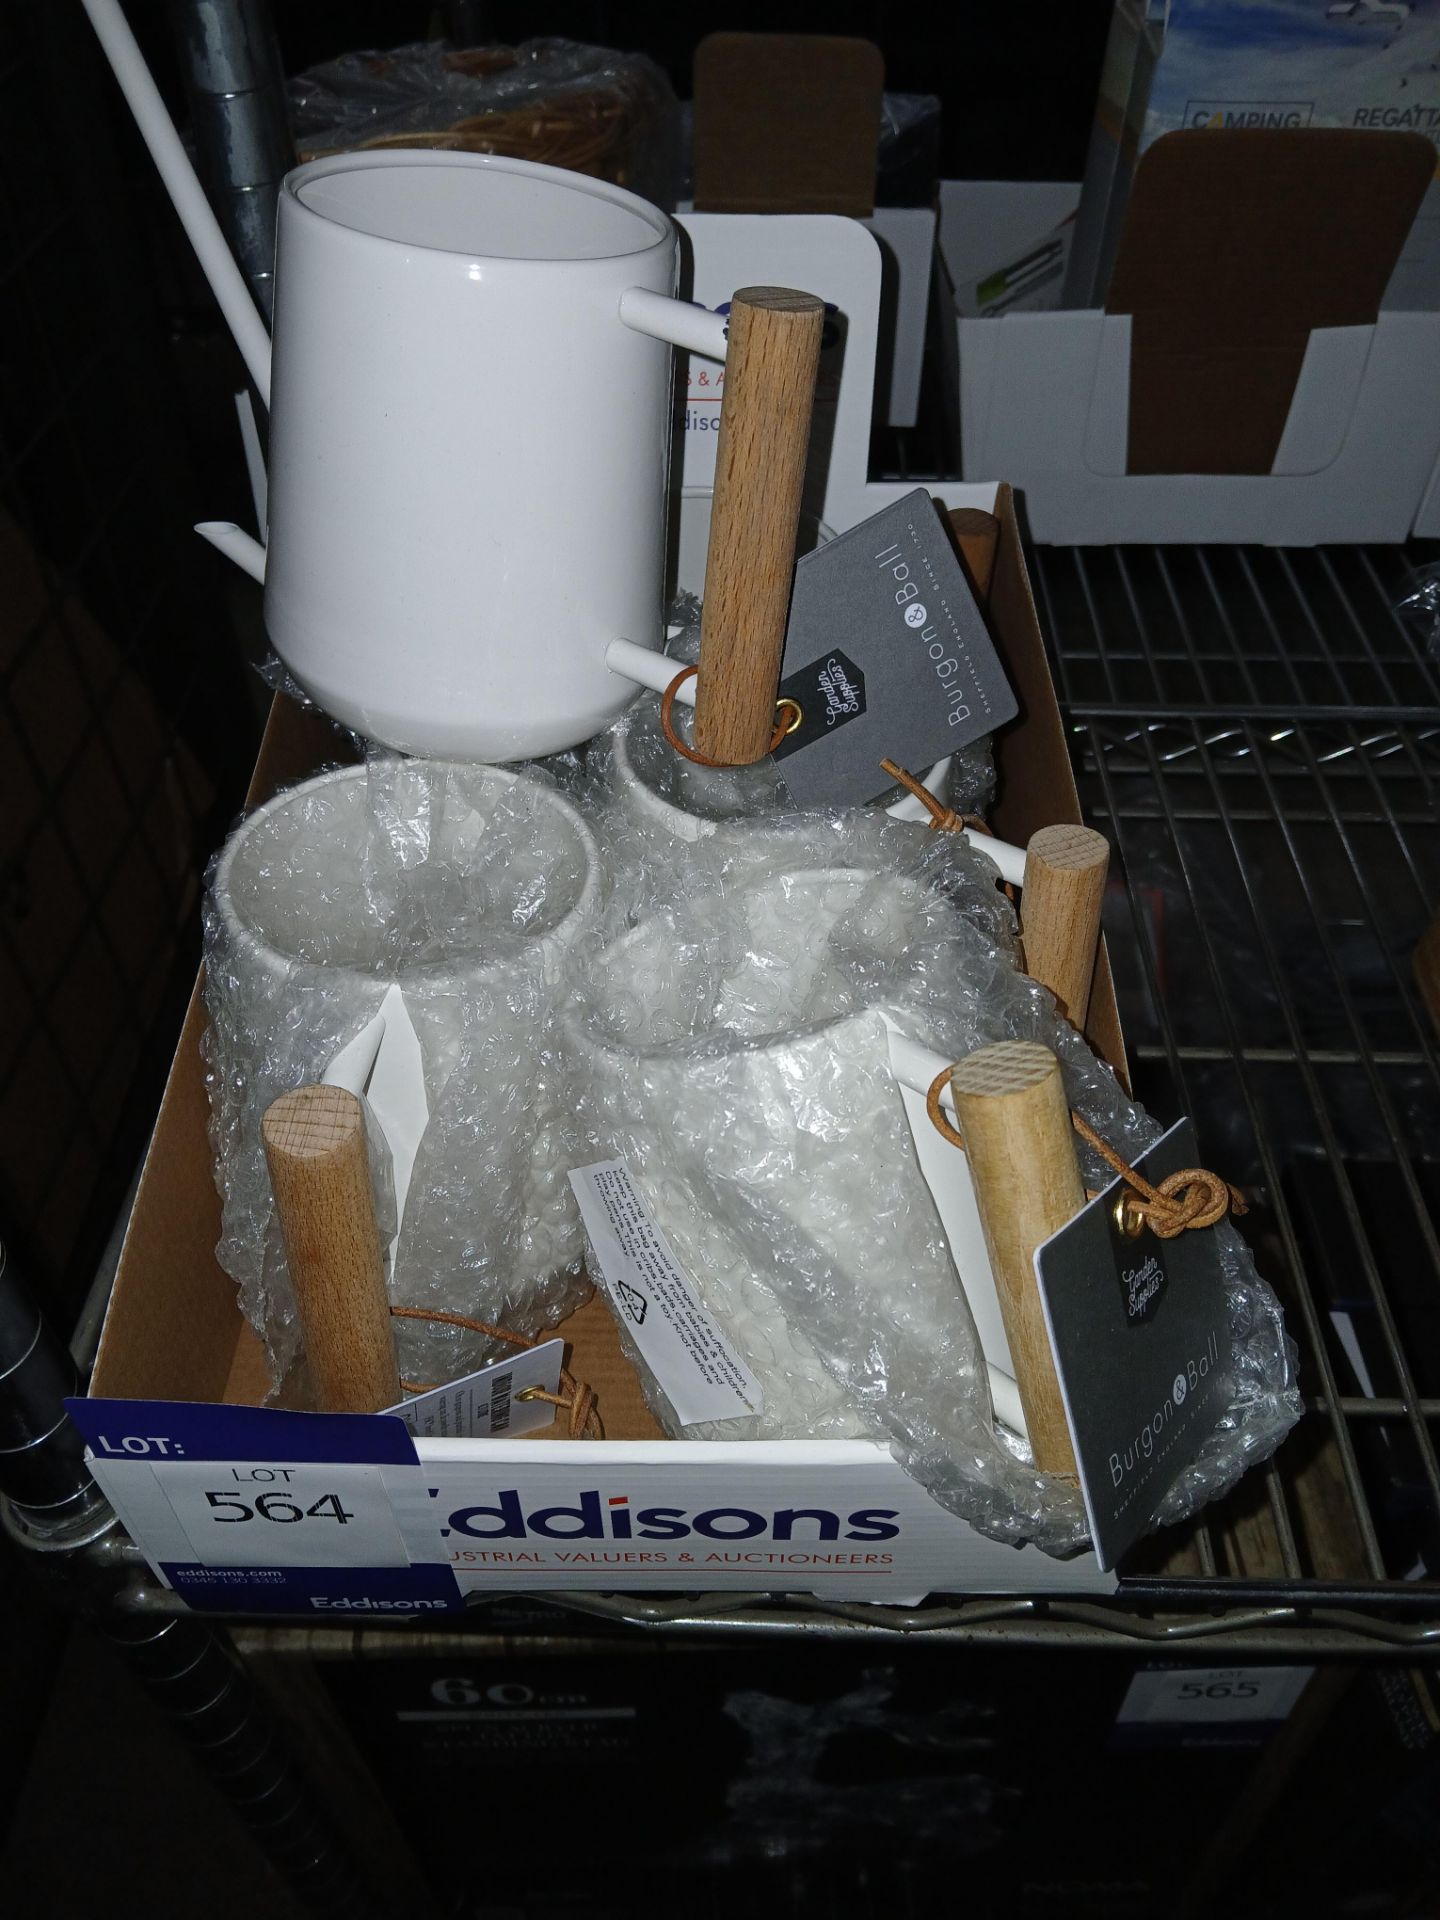 5 x Burgon and Ball Indoor Watering Cans (Please note, Viewing Strongly Recommended - Eddisons